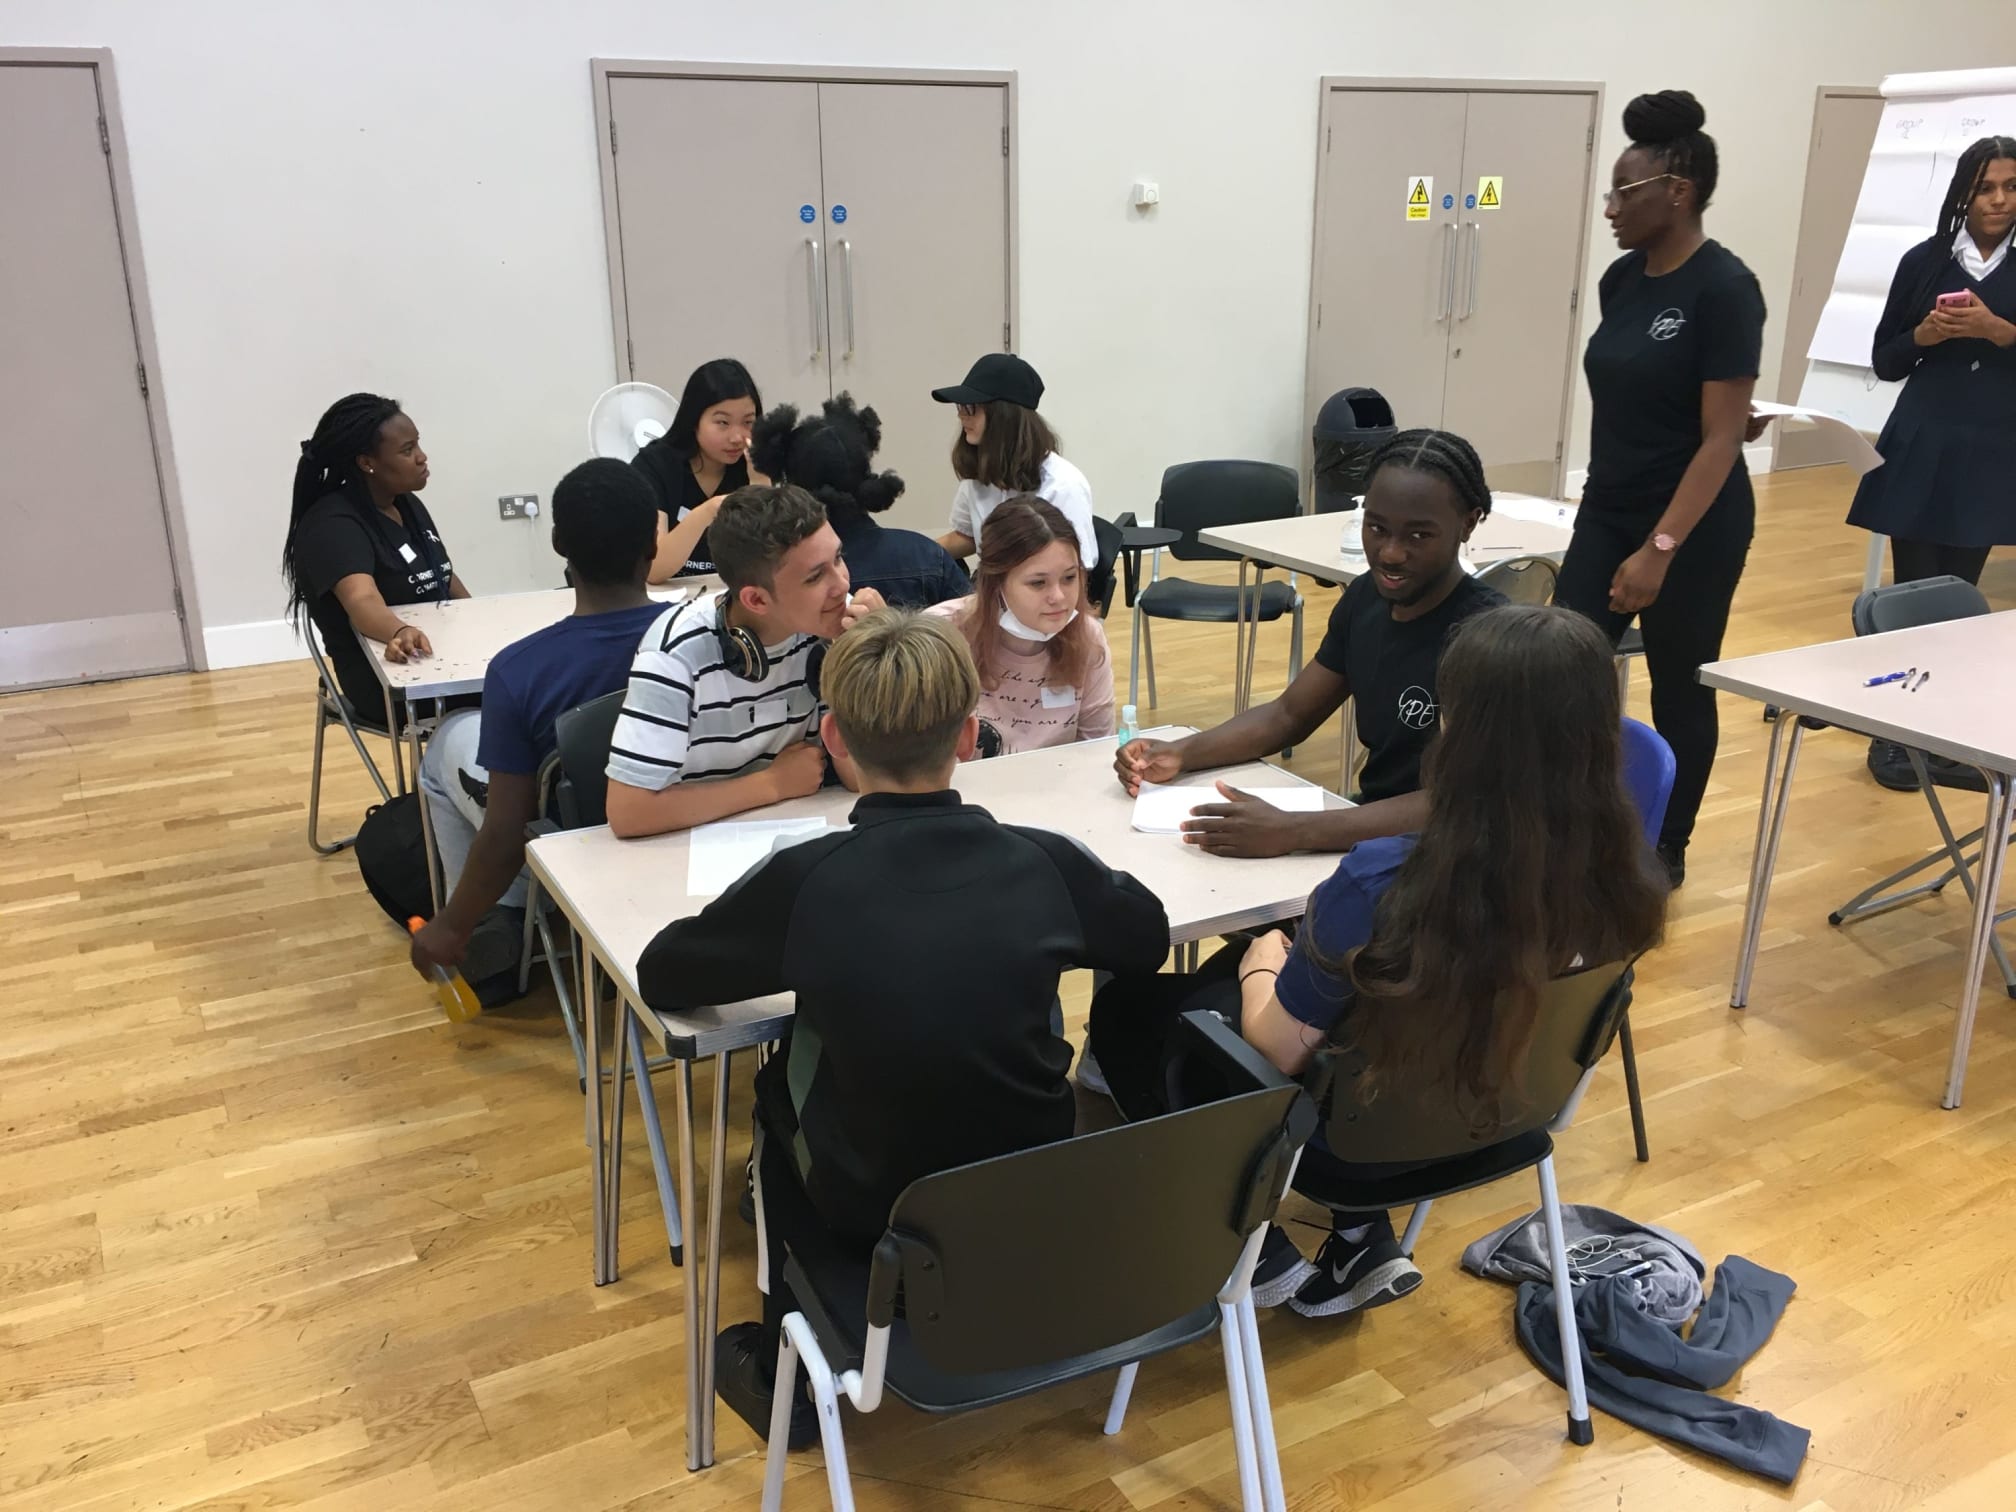 Young people taking part in our Youth Co-operative Action project in London